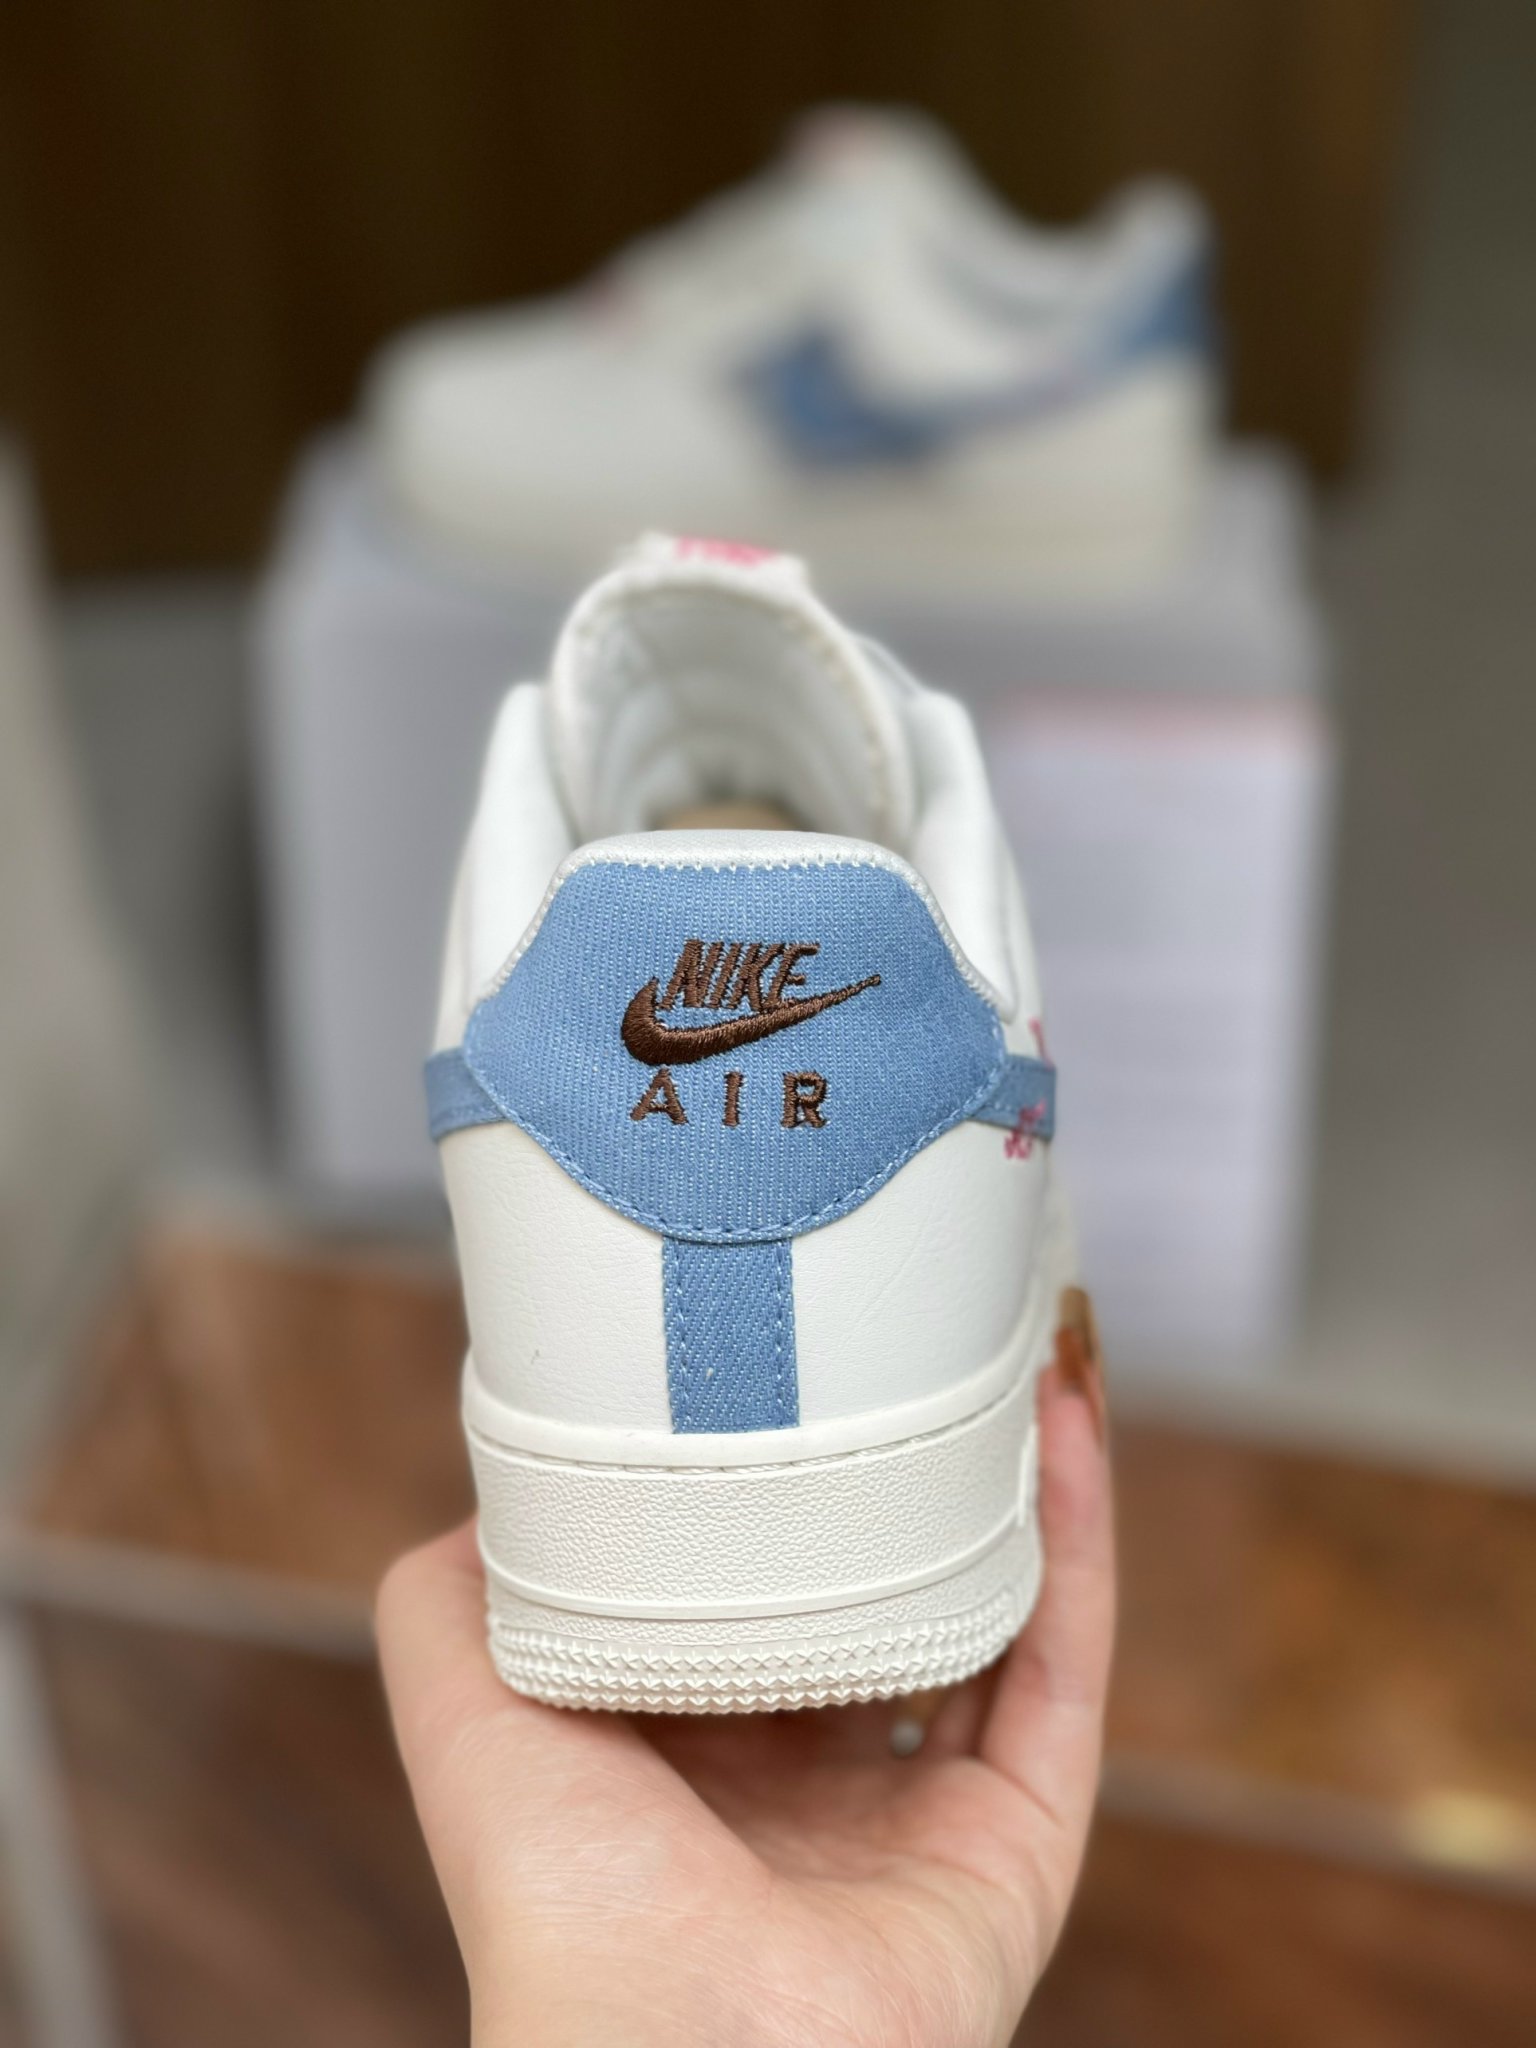 Nike Air Force 1 “Just Do It” Like Auth